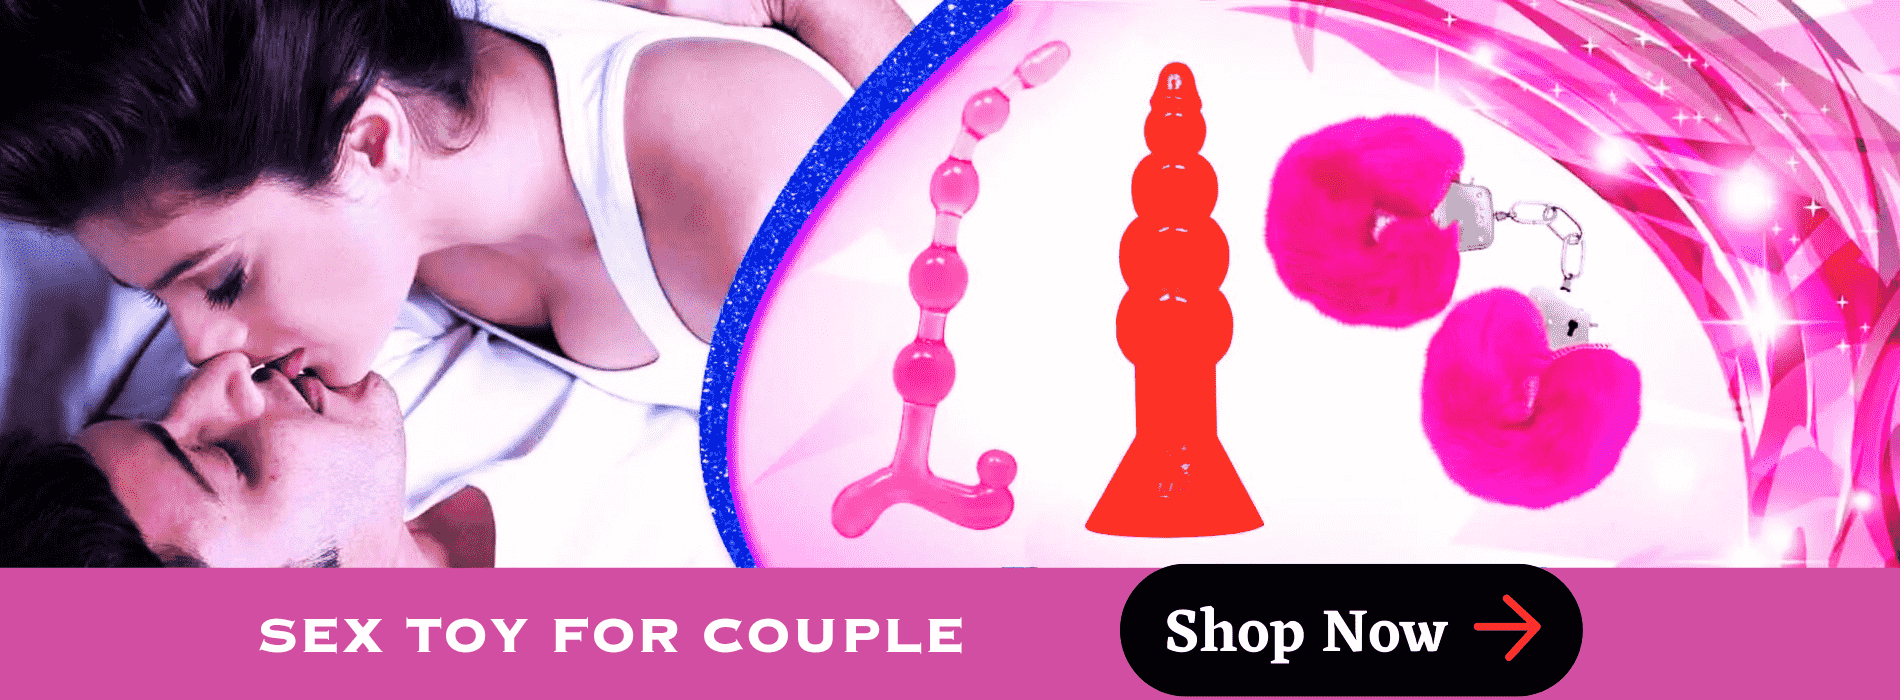 Toy for couple